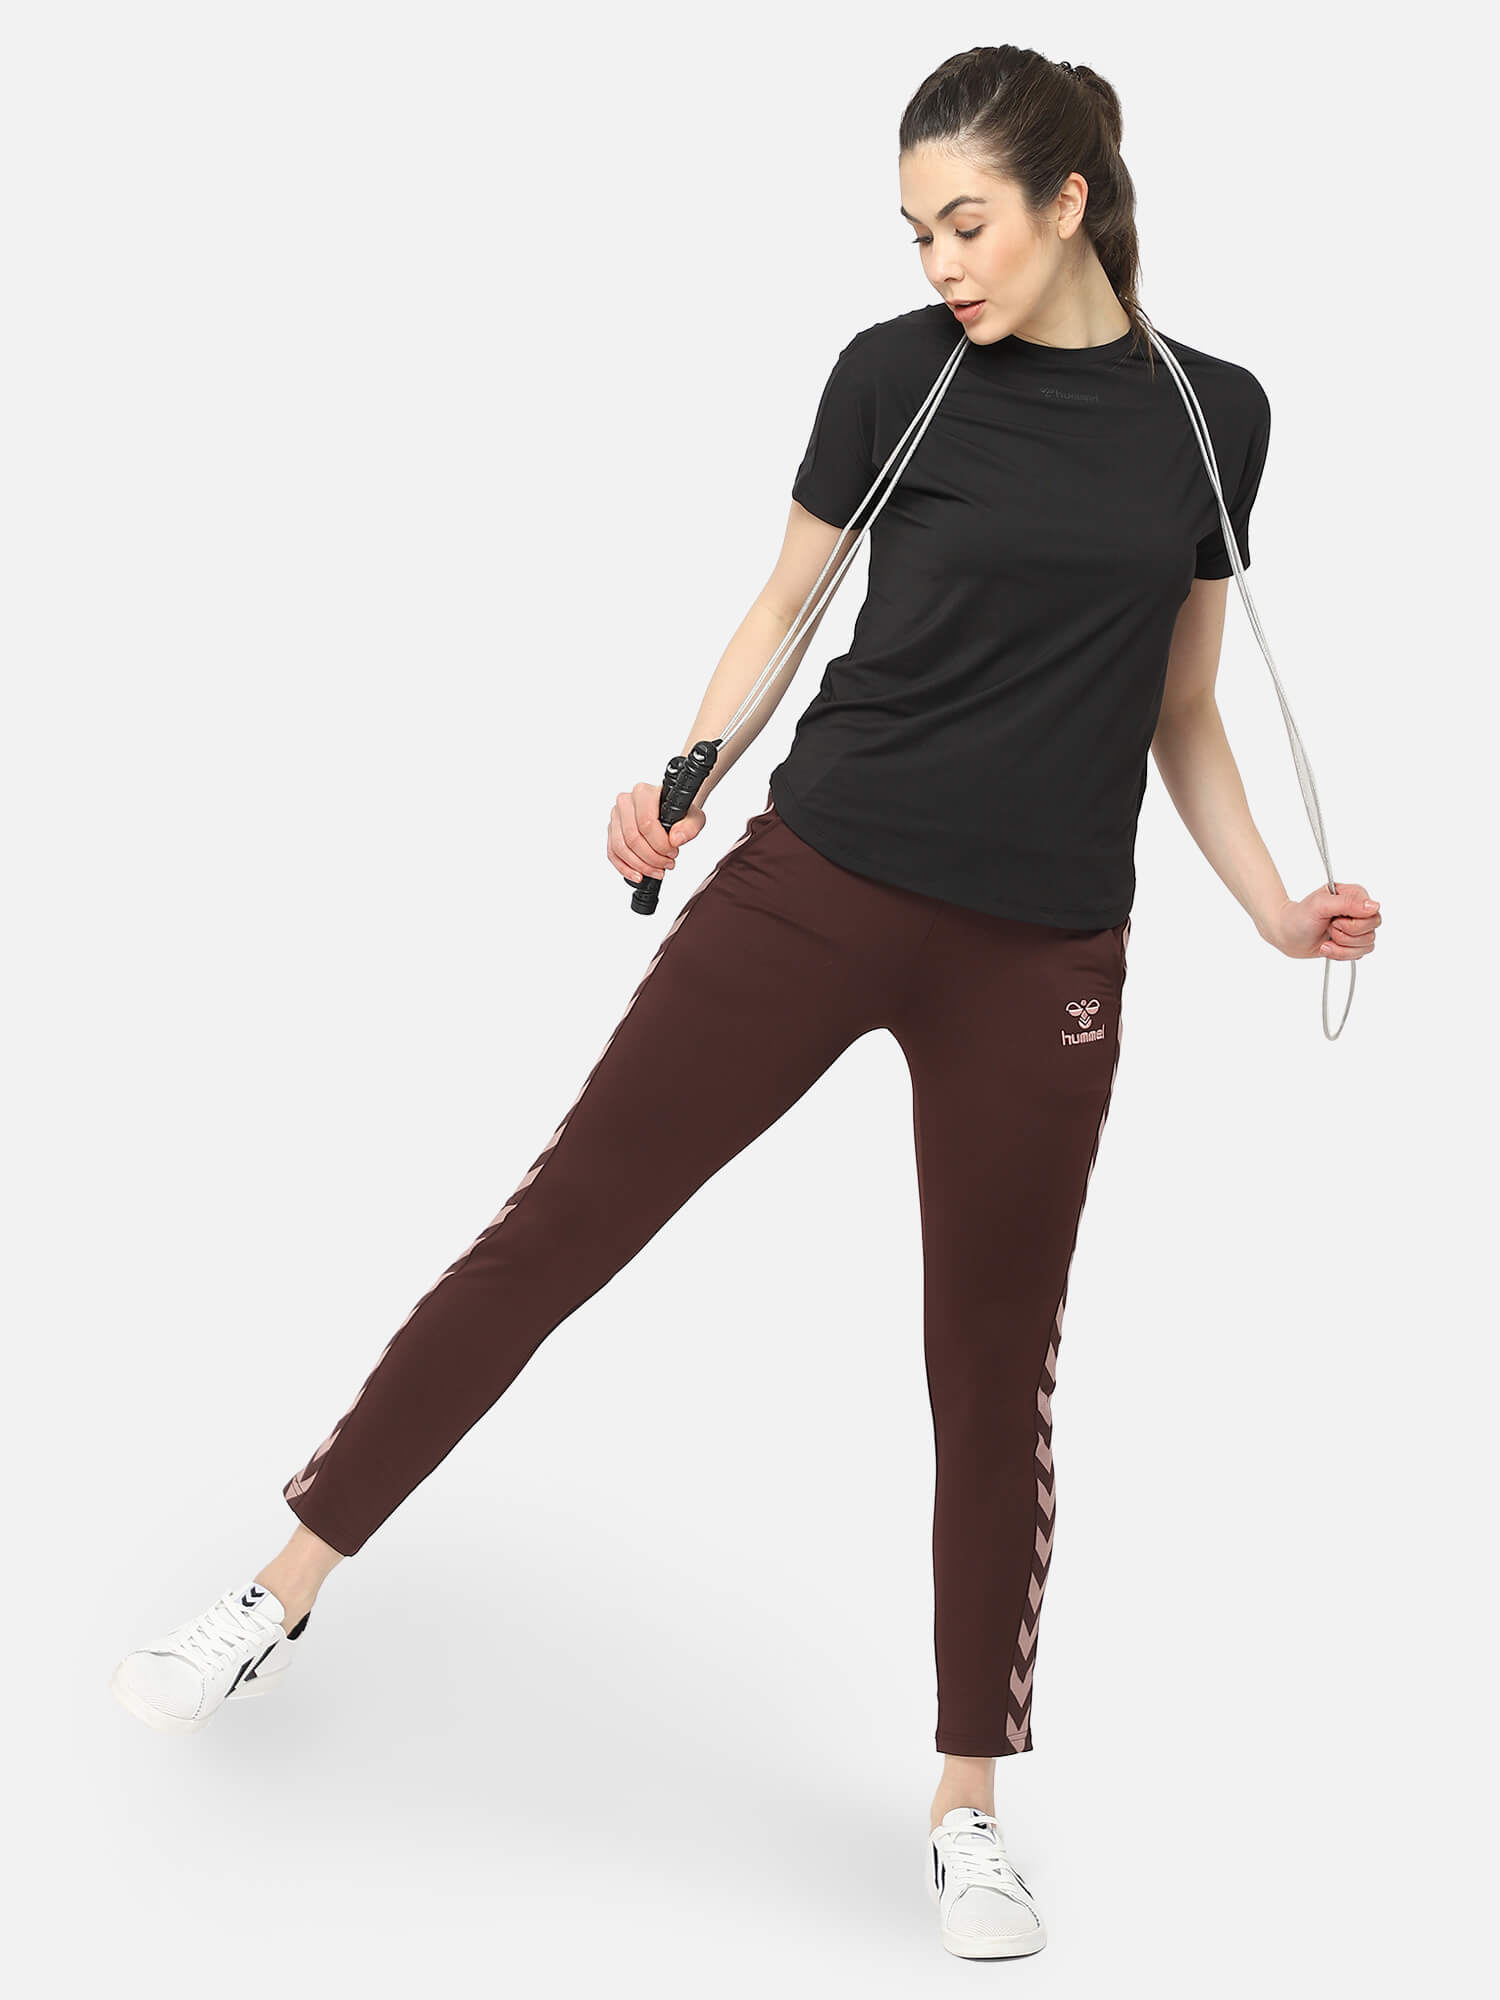 Trousers  polyester  women  4680 products  FASHIOLAin